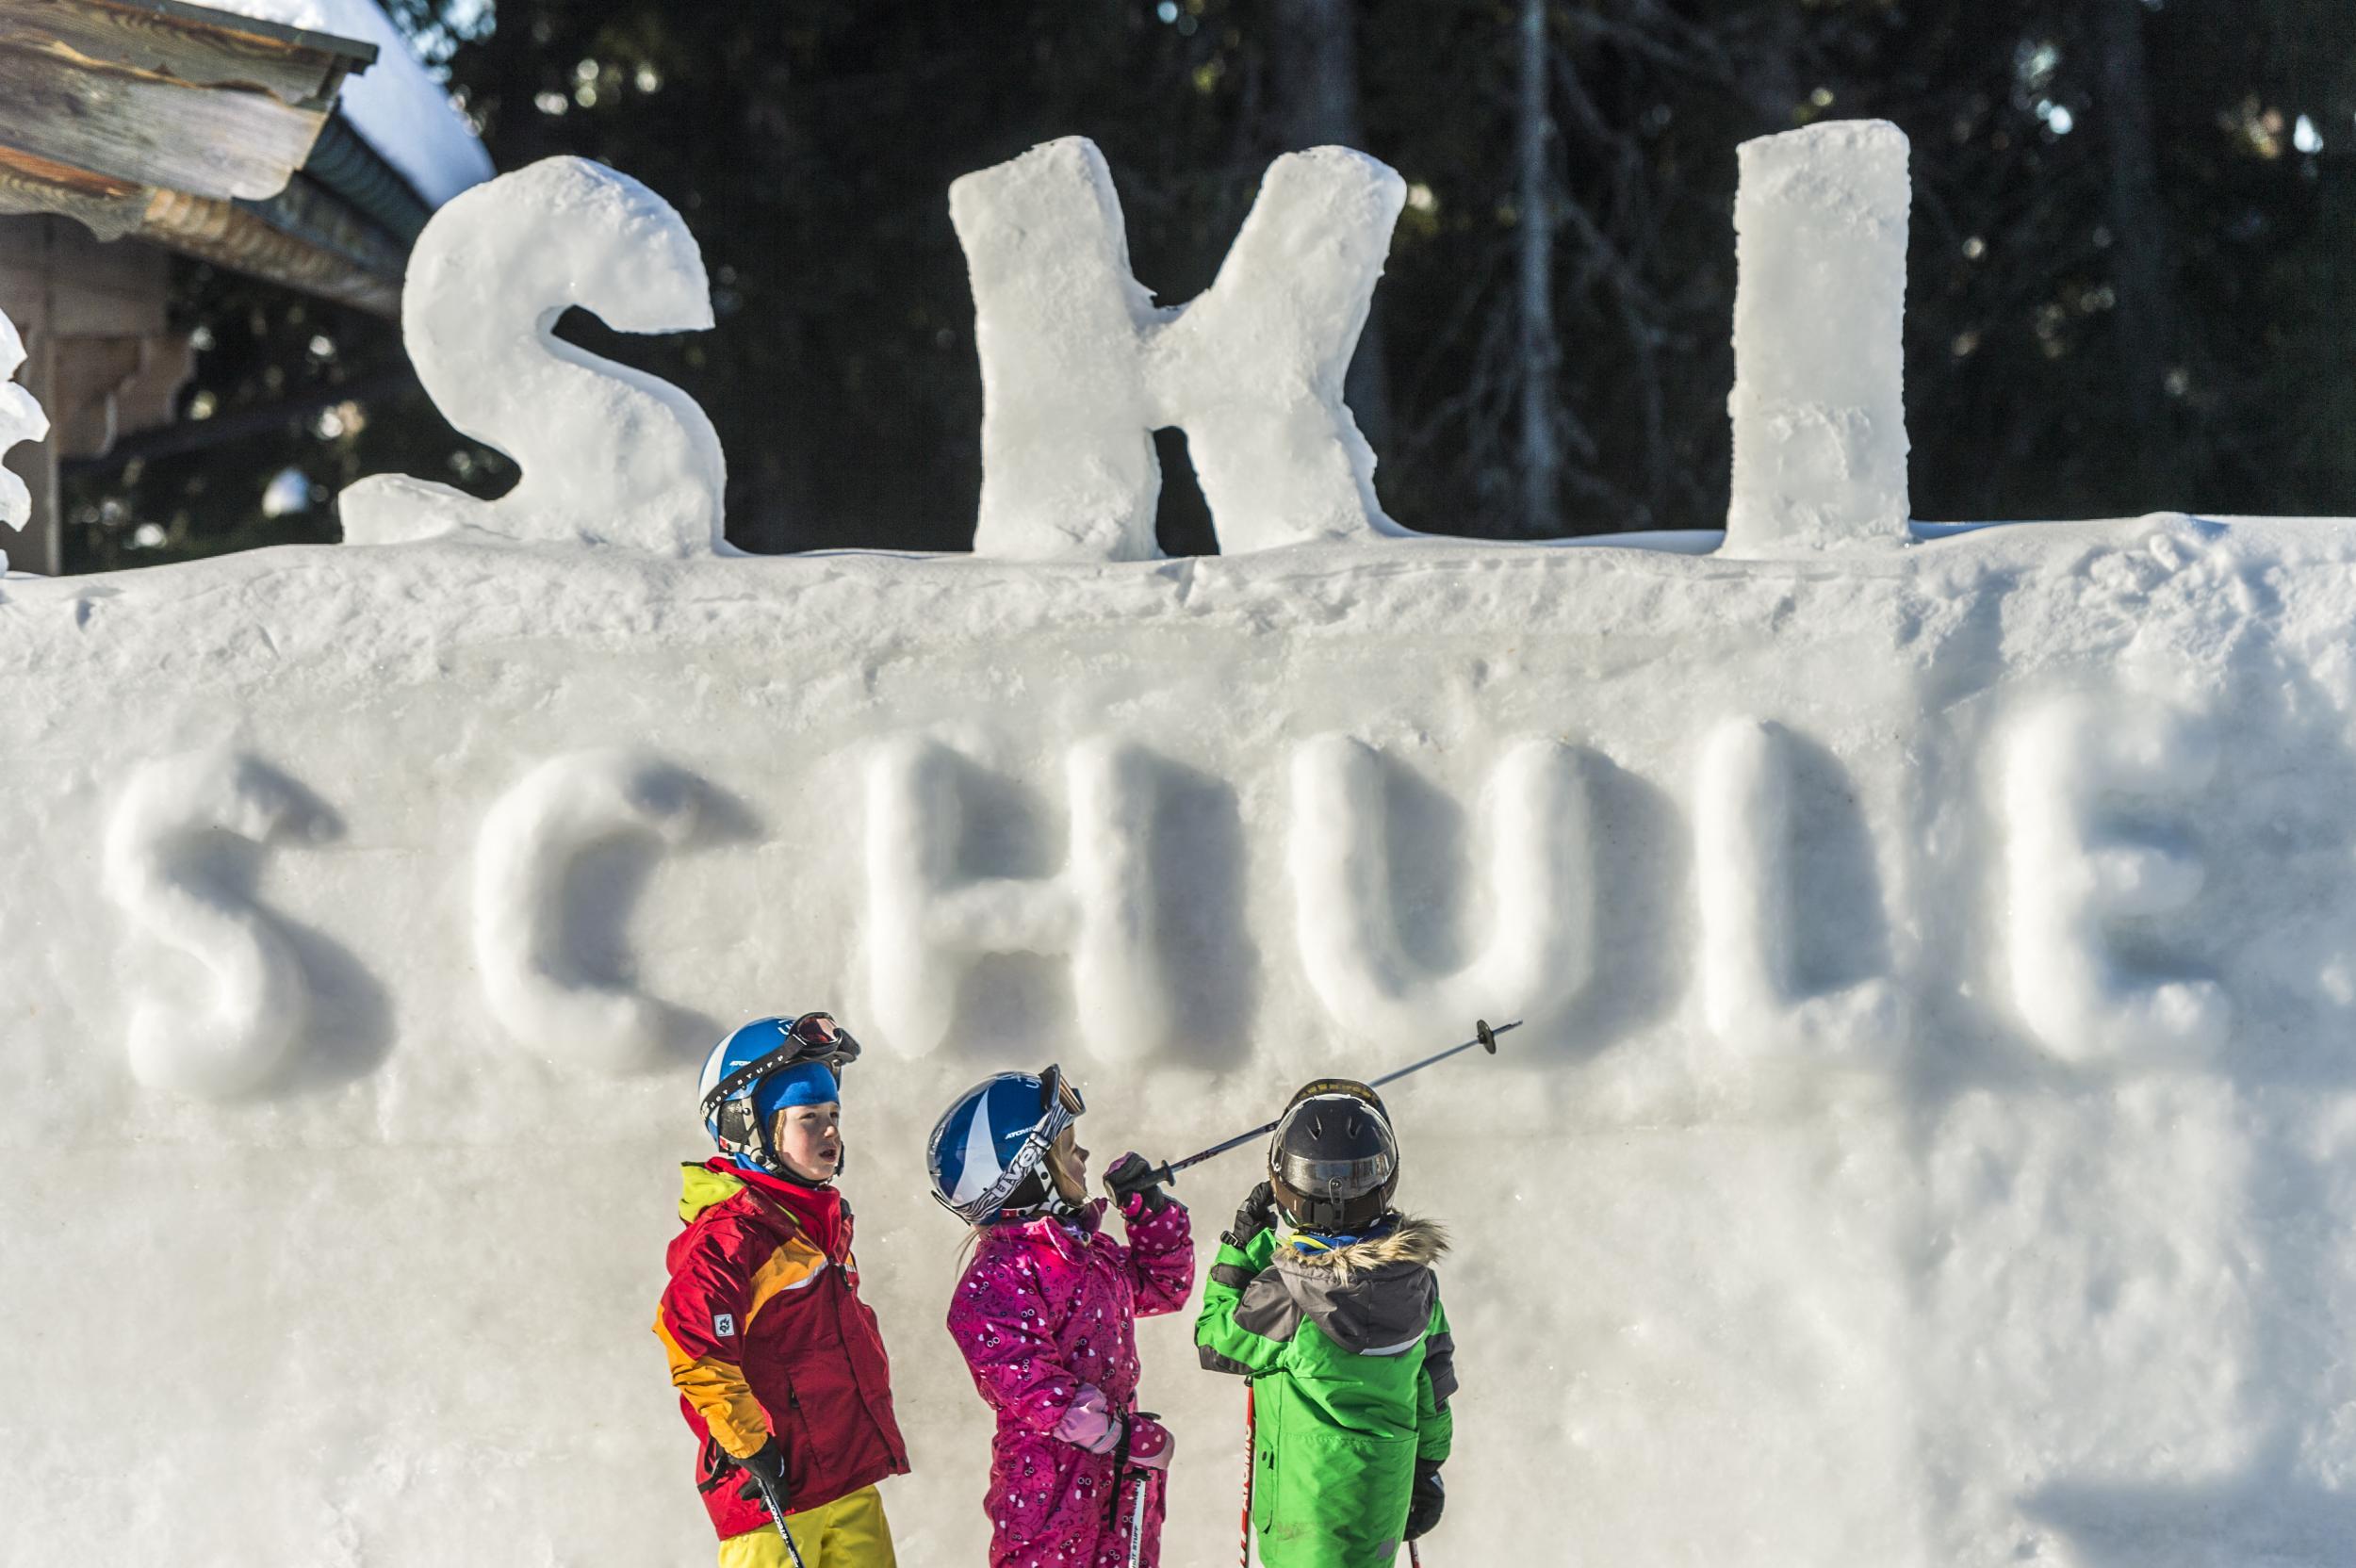 You’ll find excellent ski schools across the region with courses for children